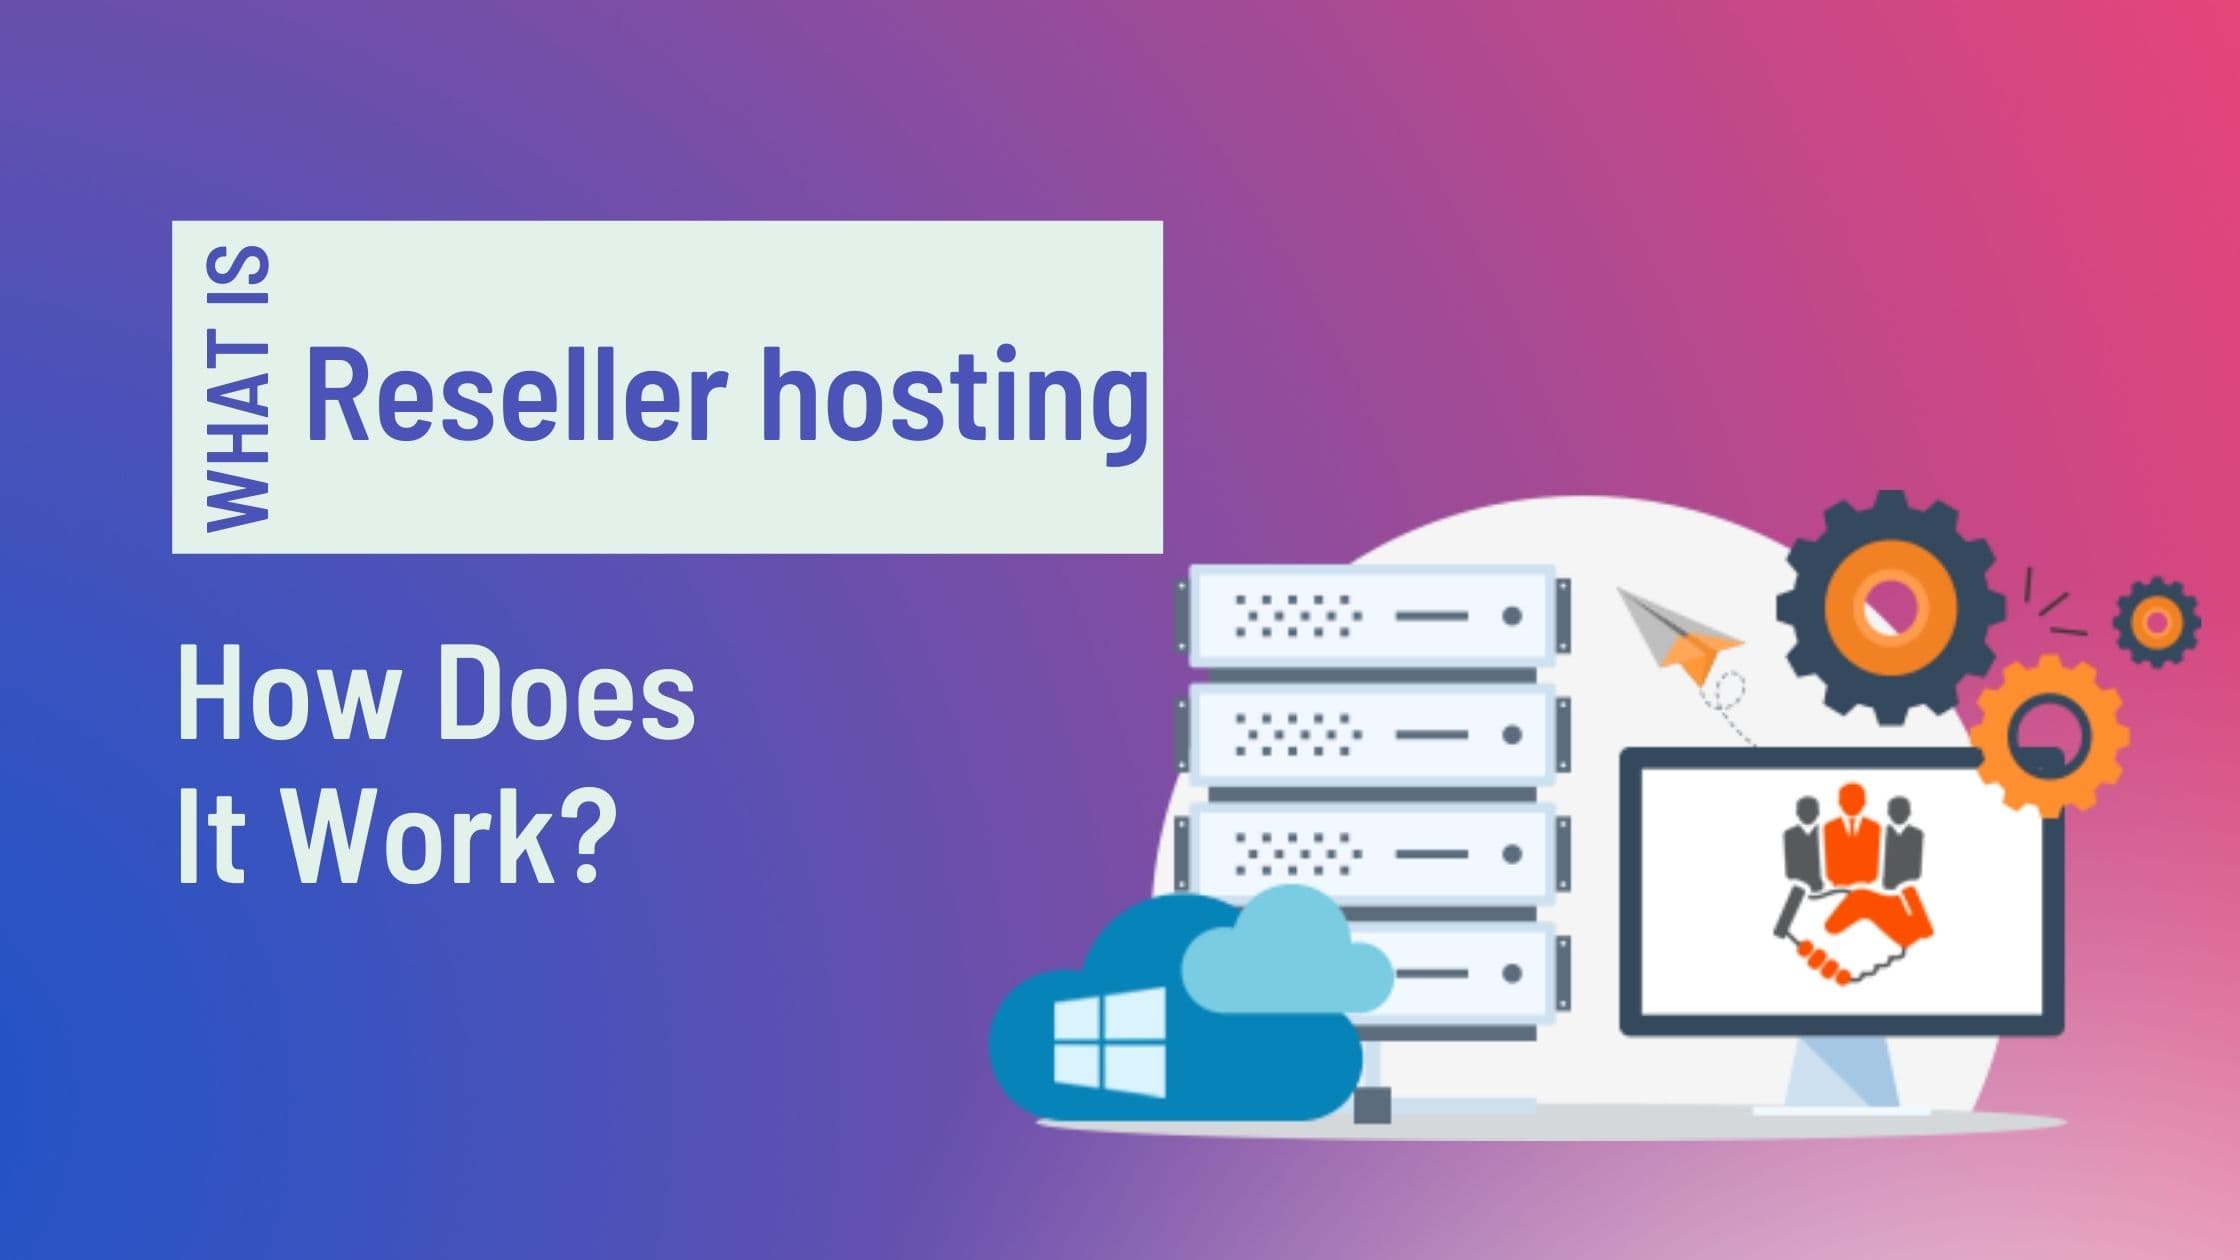 What is Reseller hosting and How does it work?